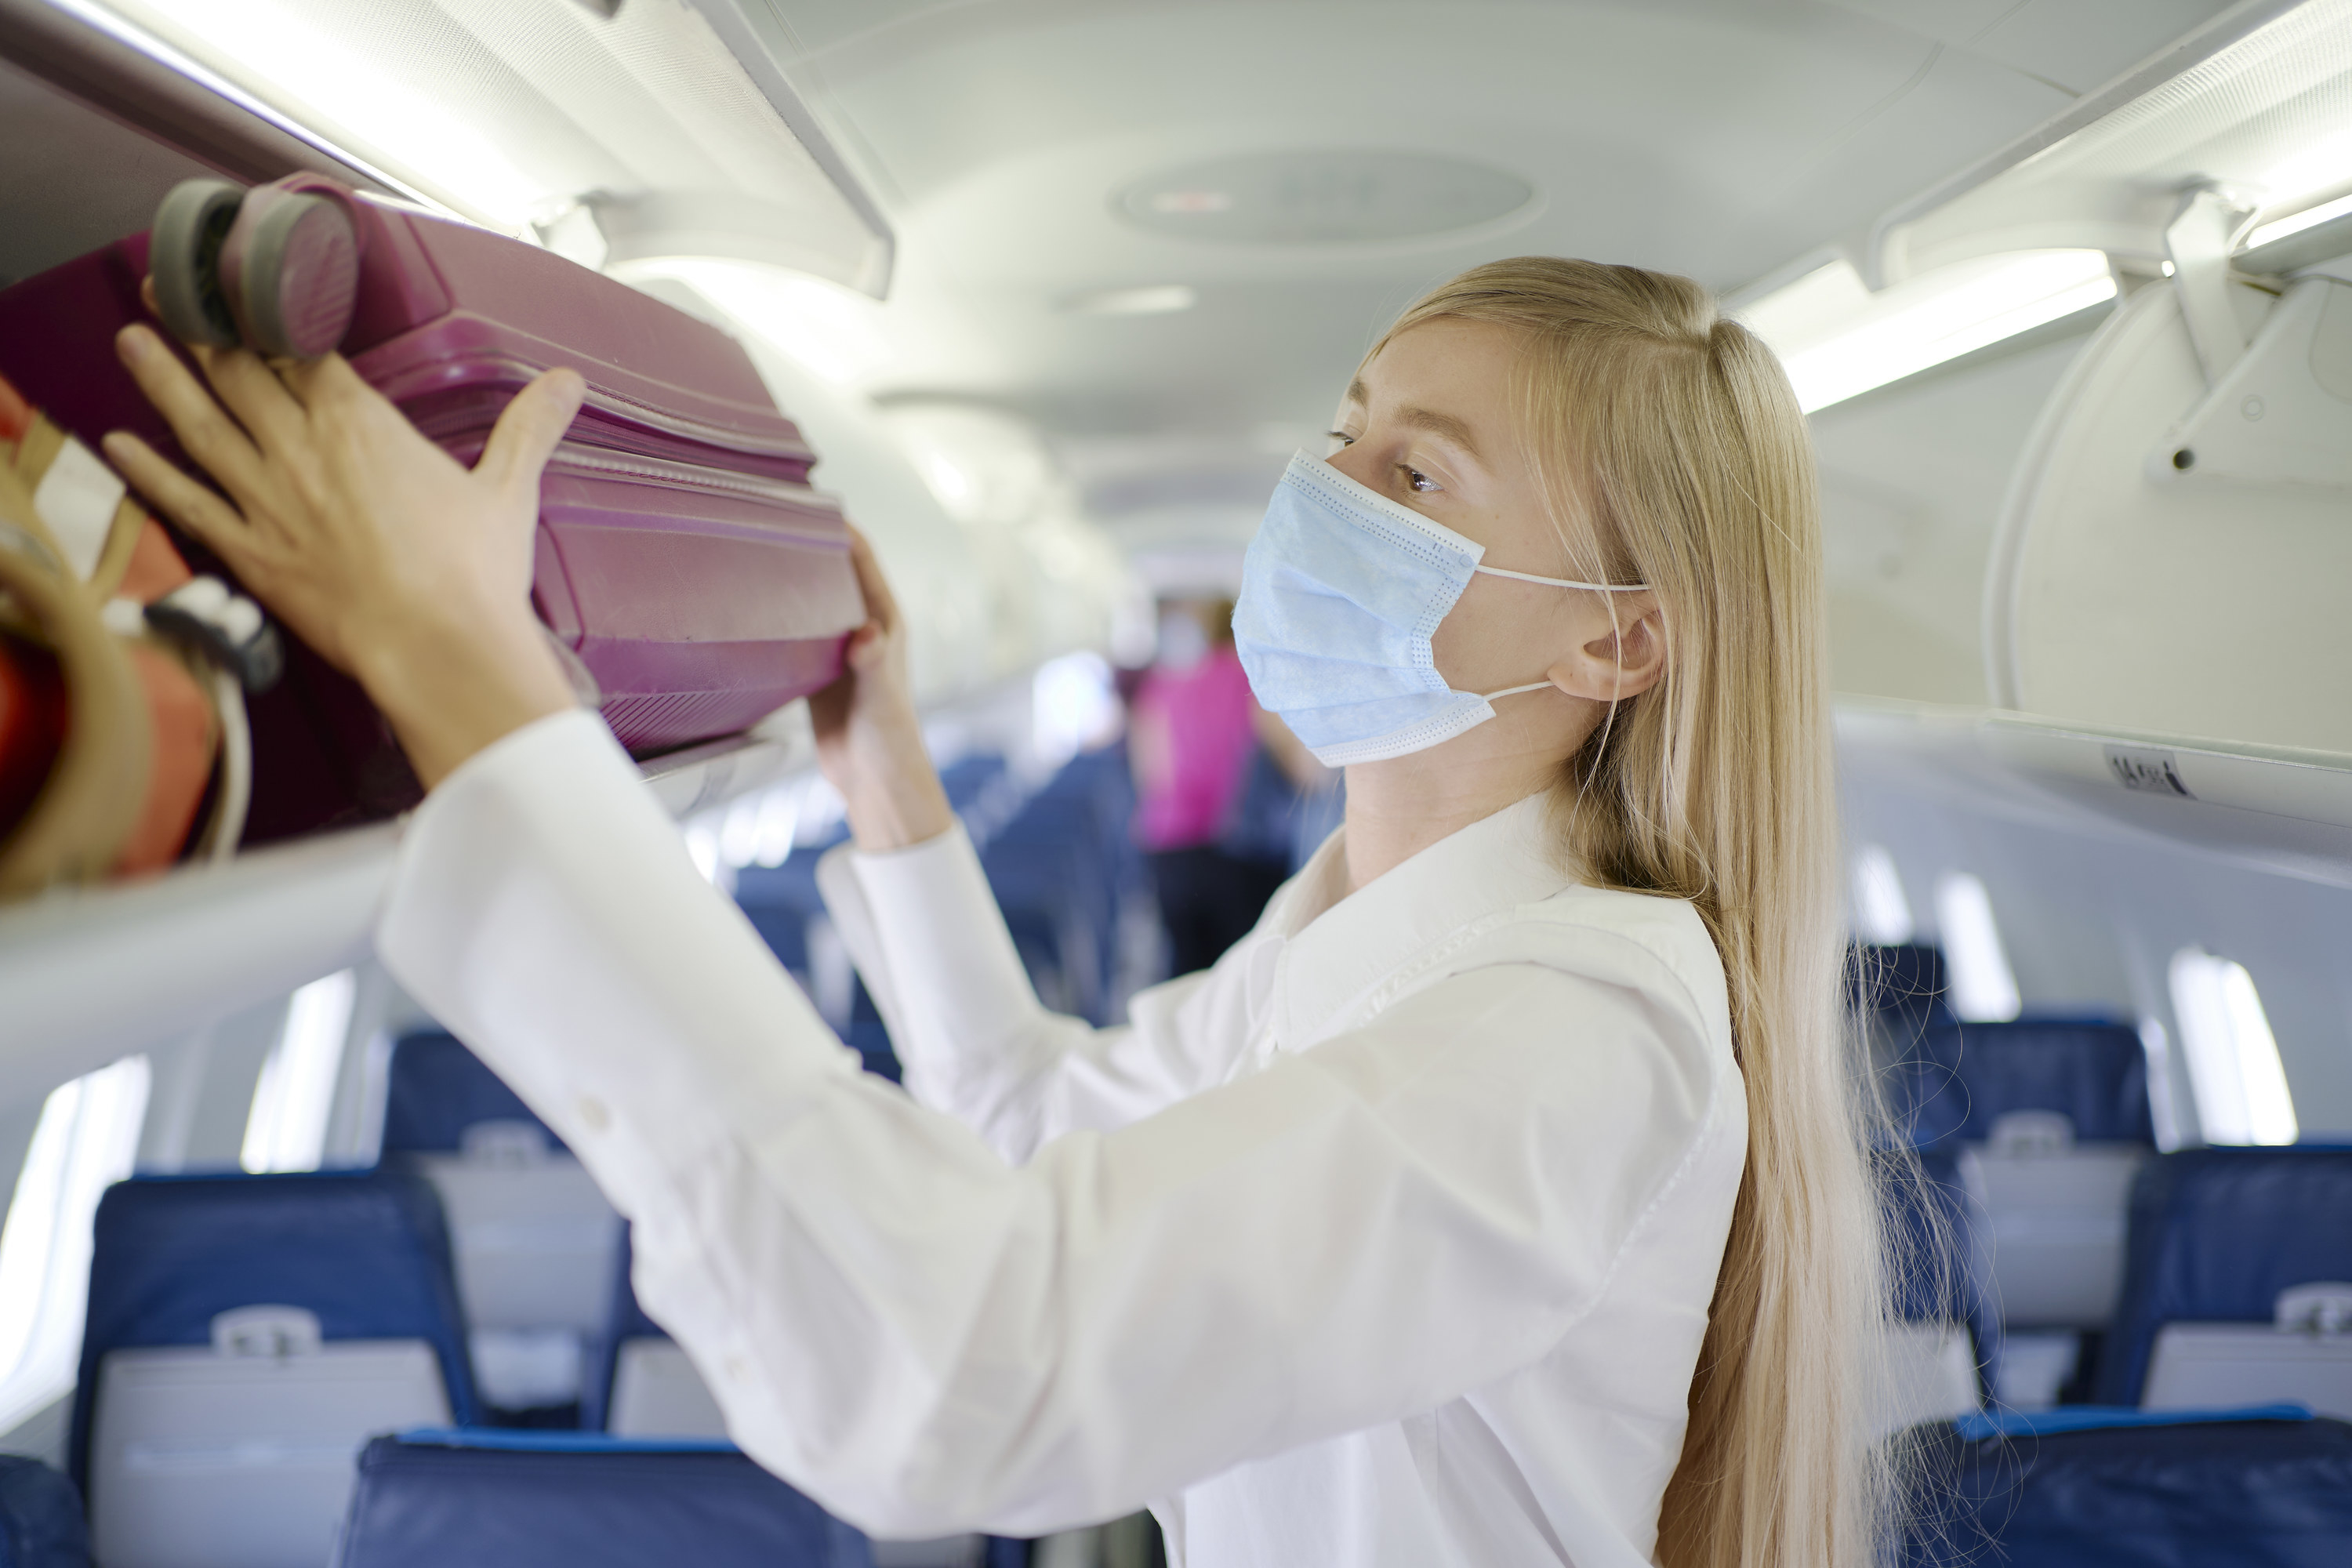 Woman puts carry-on bag in the overhead bin